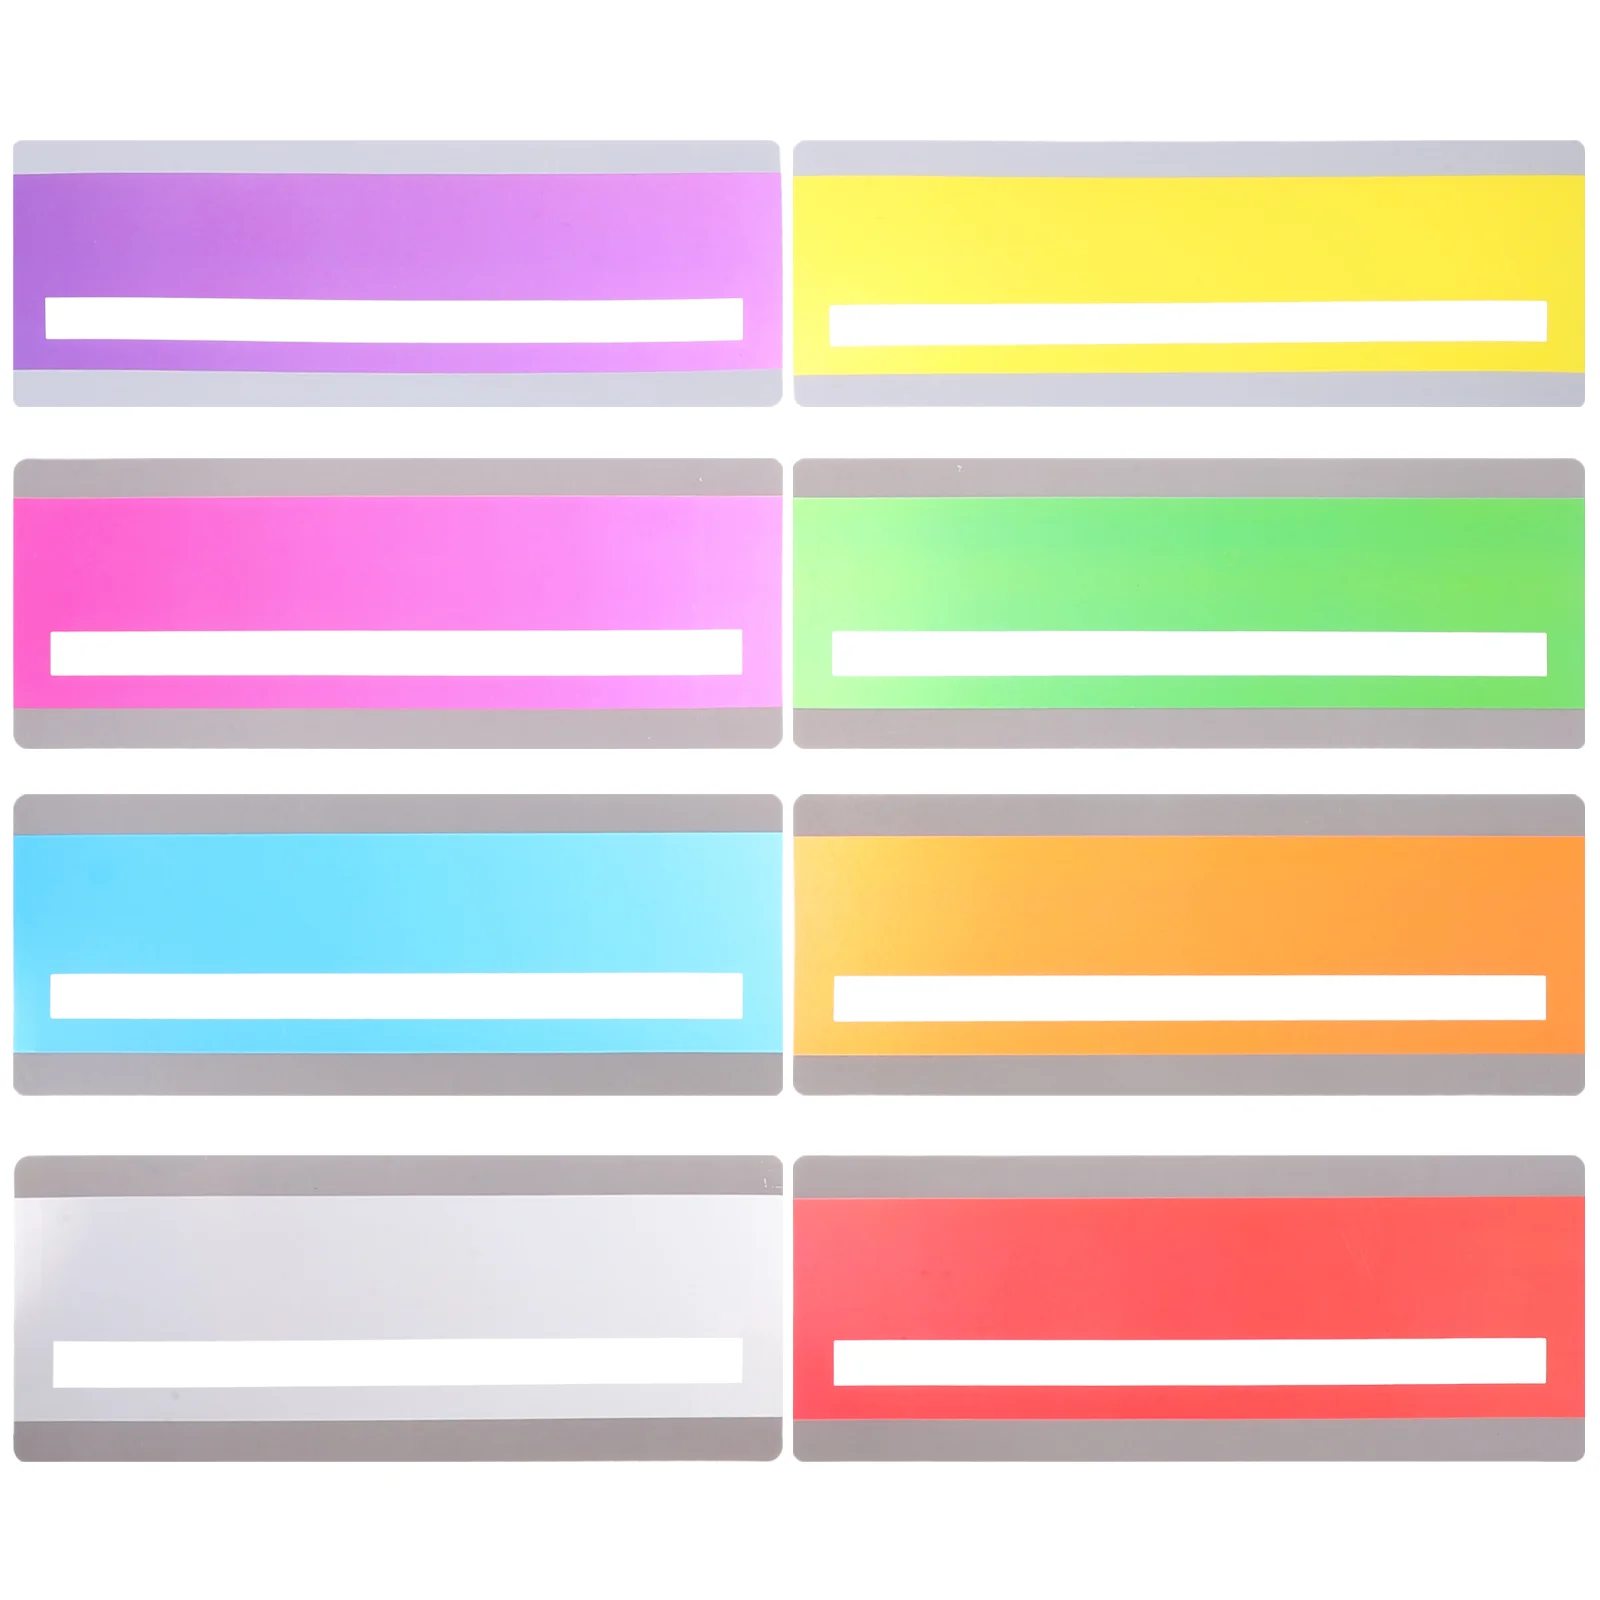 

Guided Highlighter Highlight Colored Overlays Colorful Bookmark Teaching Students Scale Ruler Reading Guide